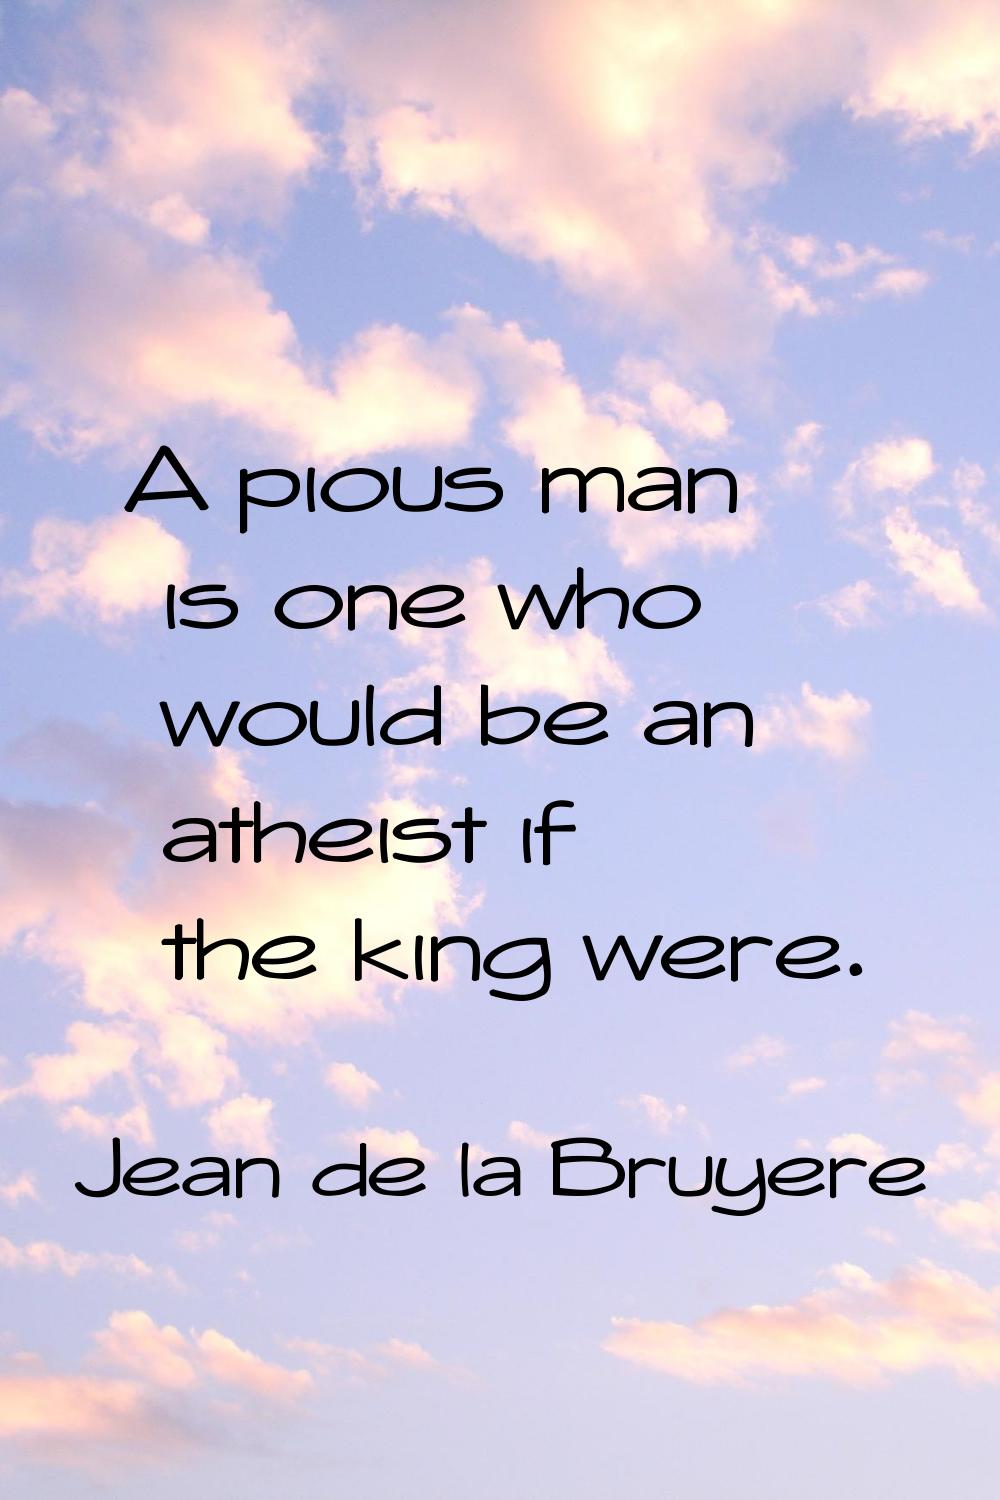 A pious man is one who would be an atheist if the king were.